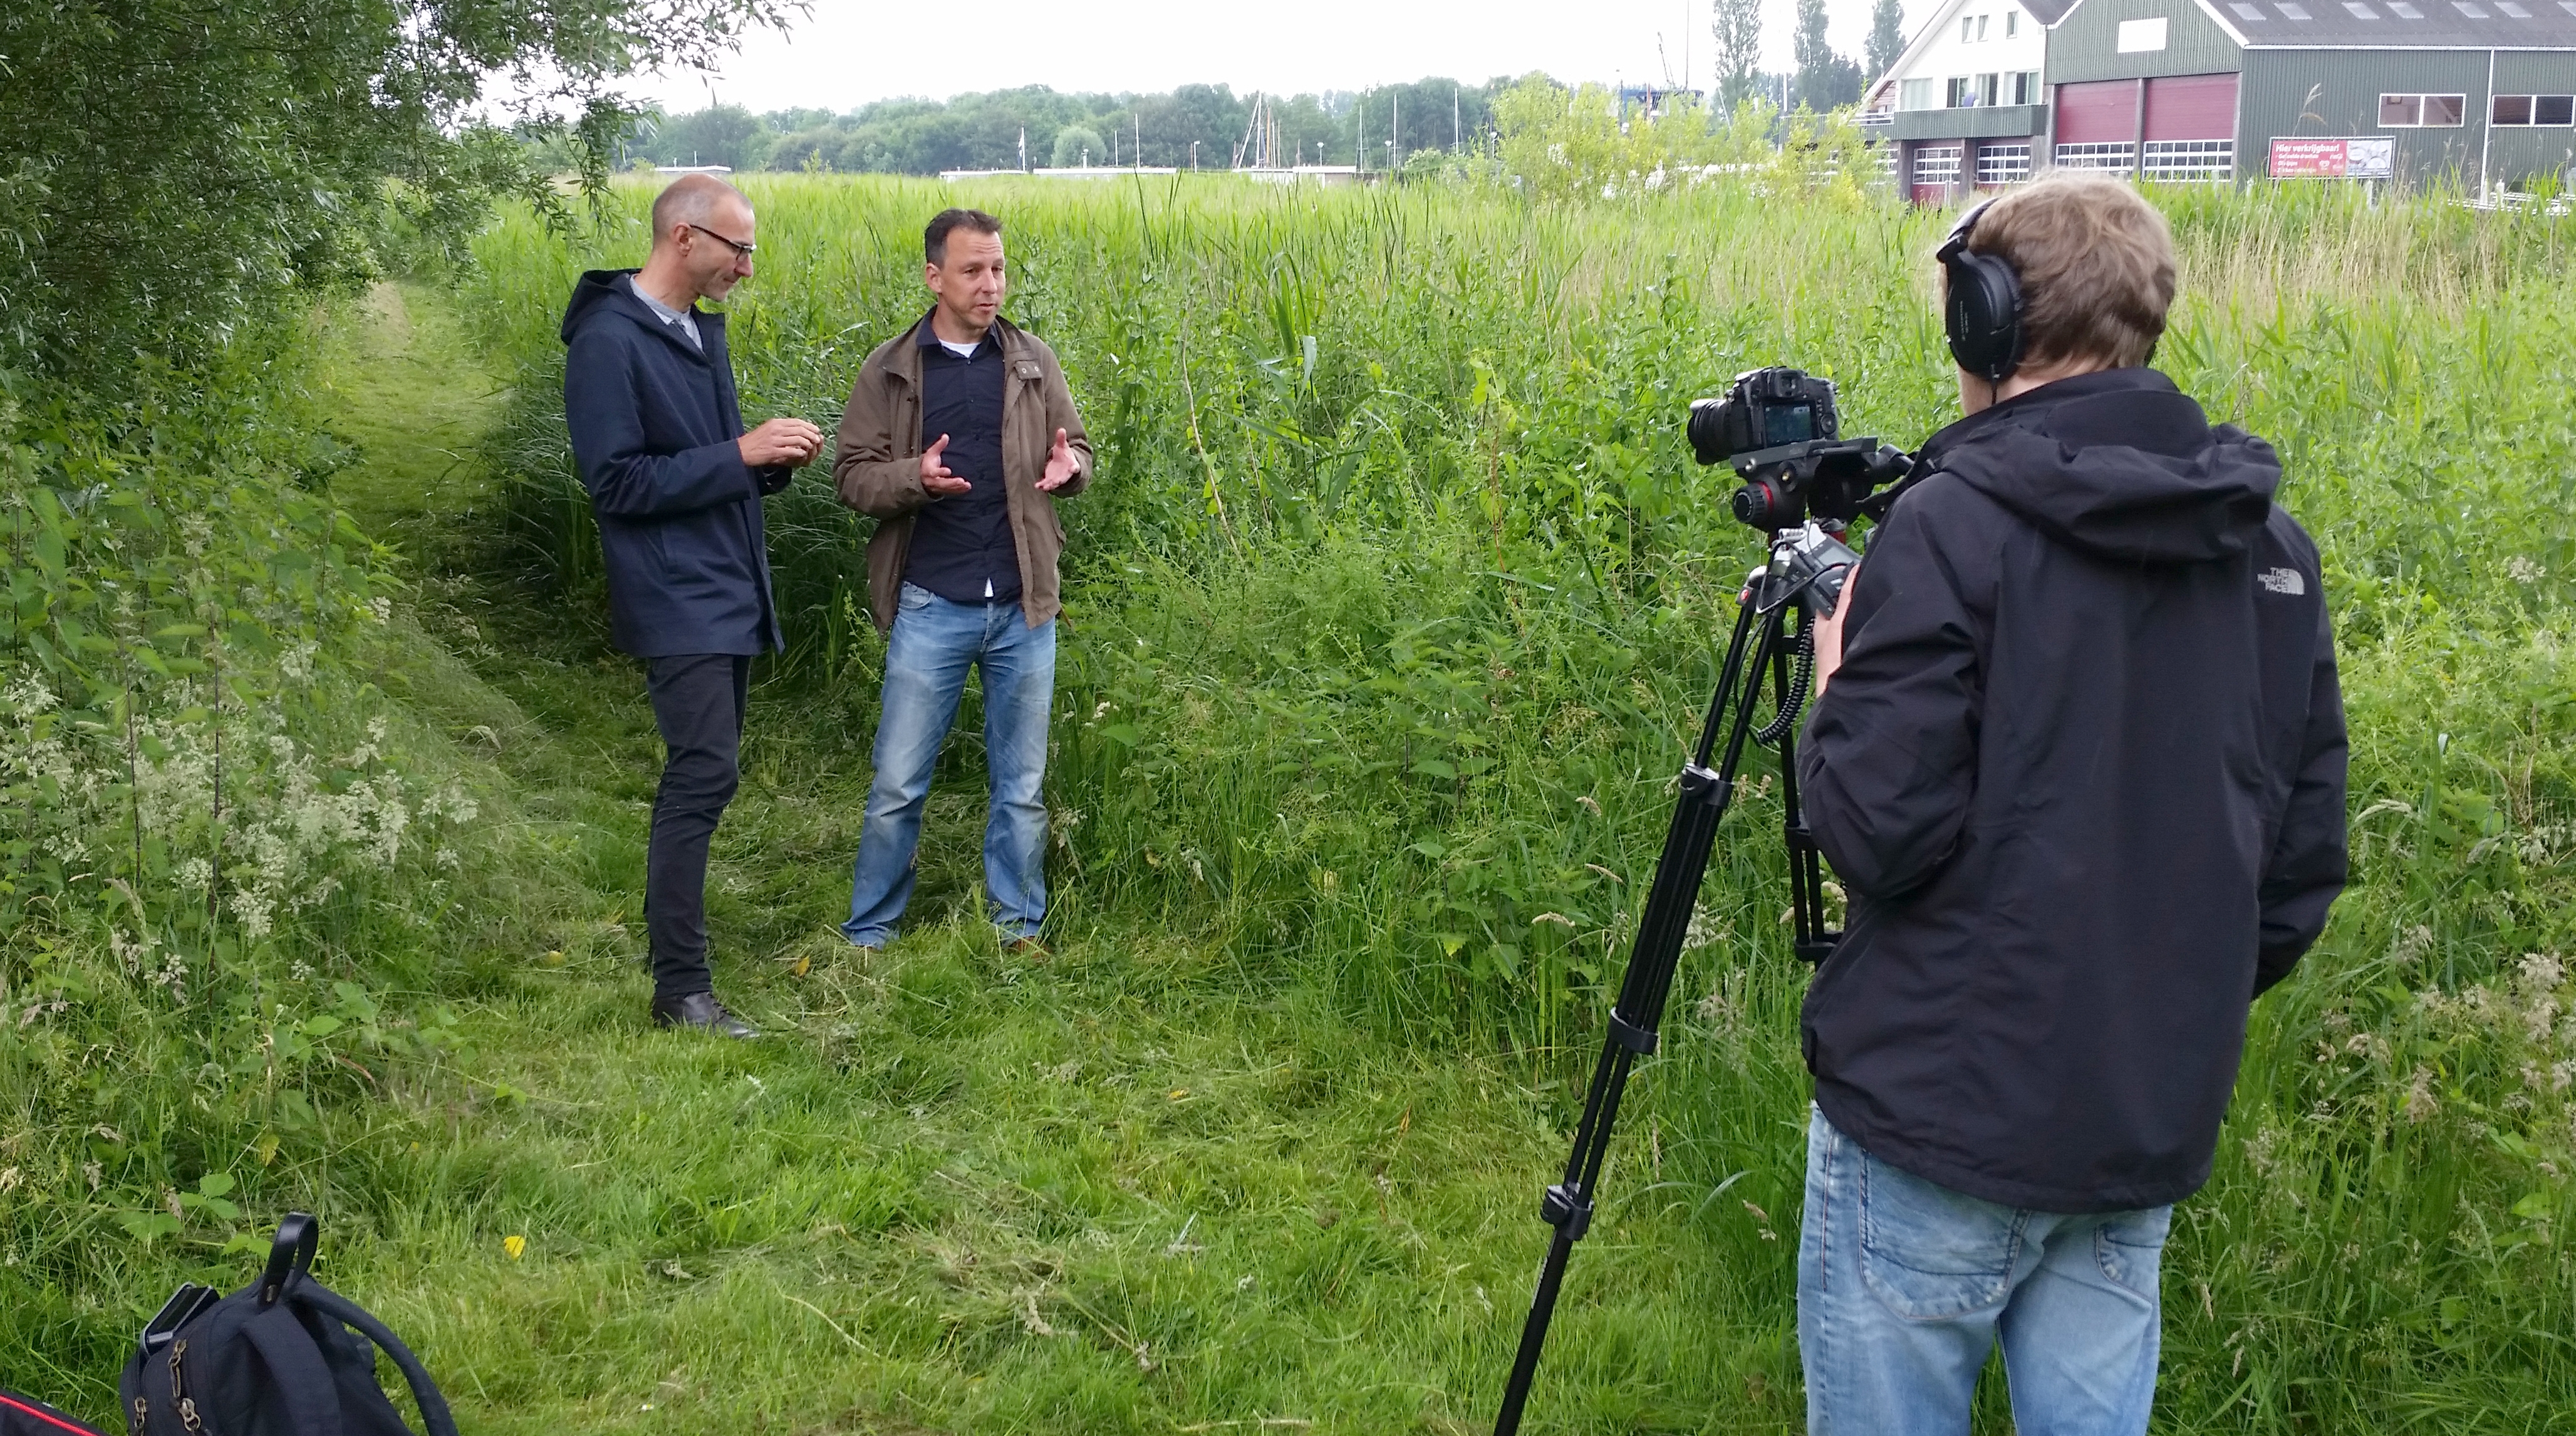 We shot part of our MOOC Evolution Today in the field - where biologists feel most at home!